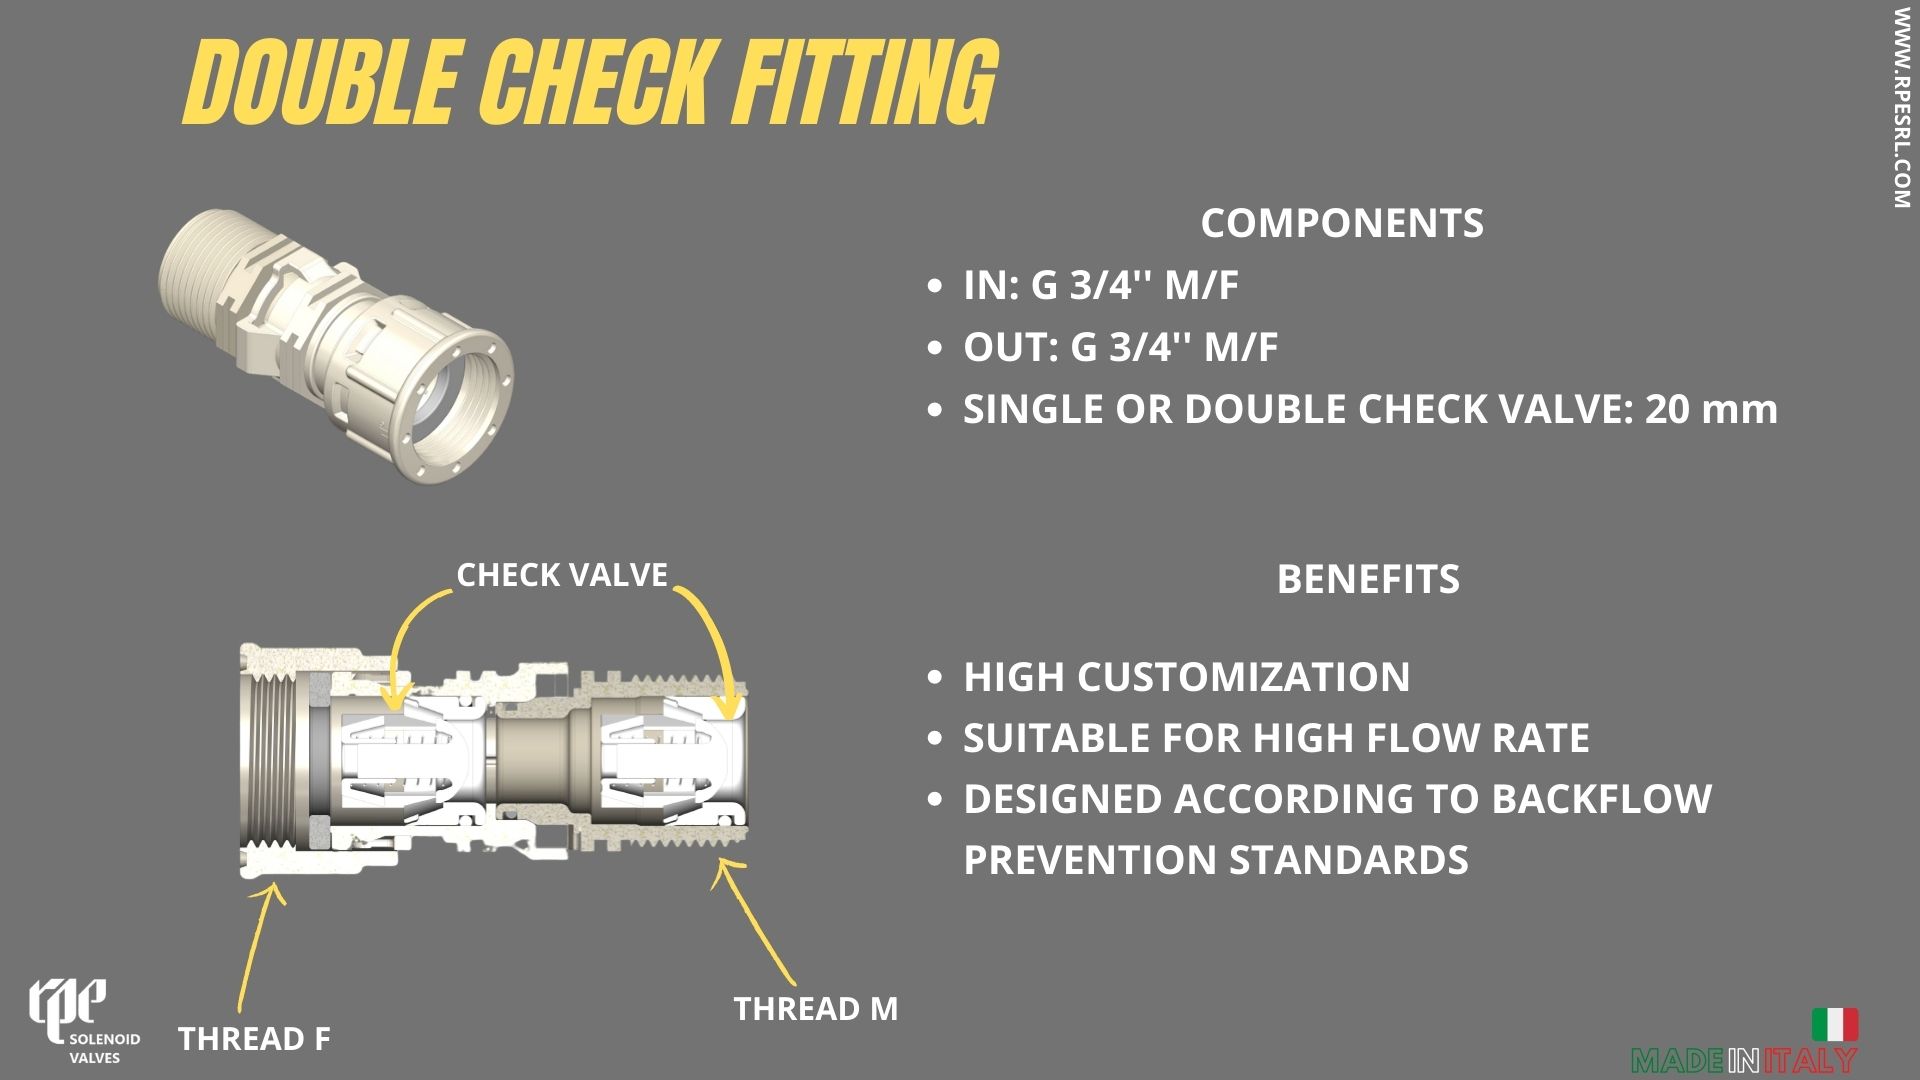 Nuevo Producto: Double Check Fitting